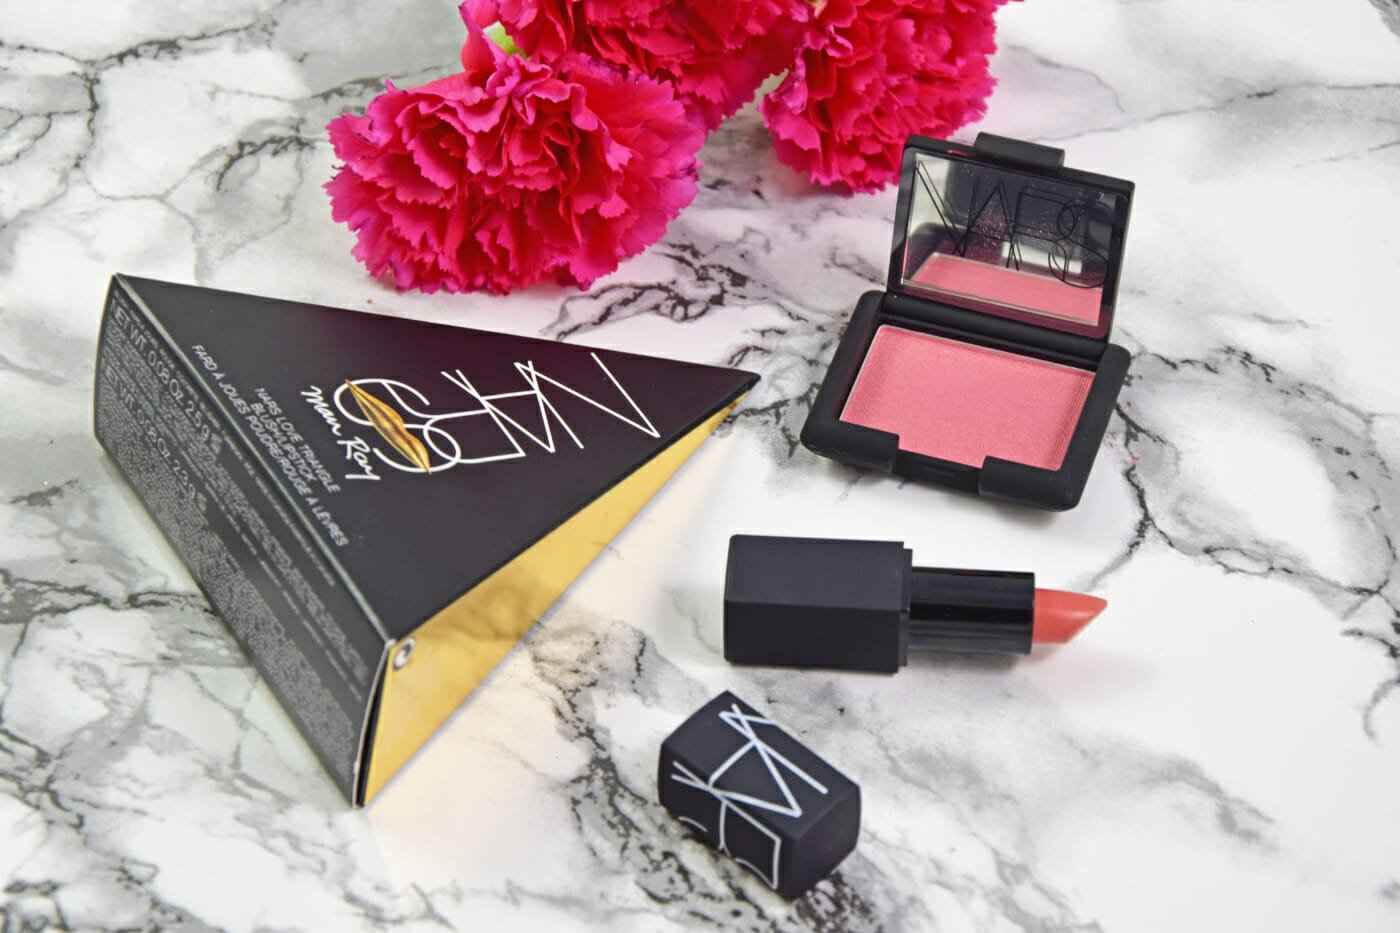 NARS love triangle holiday collection